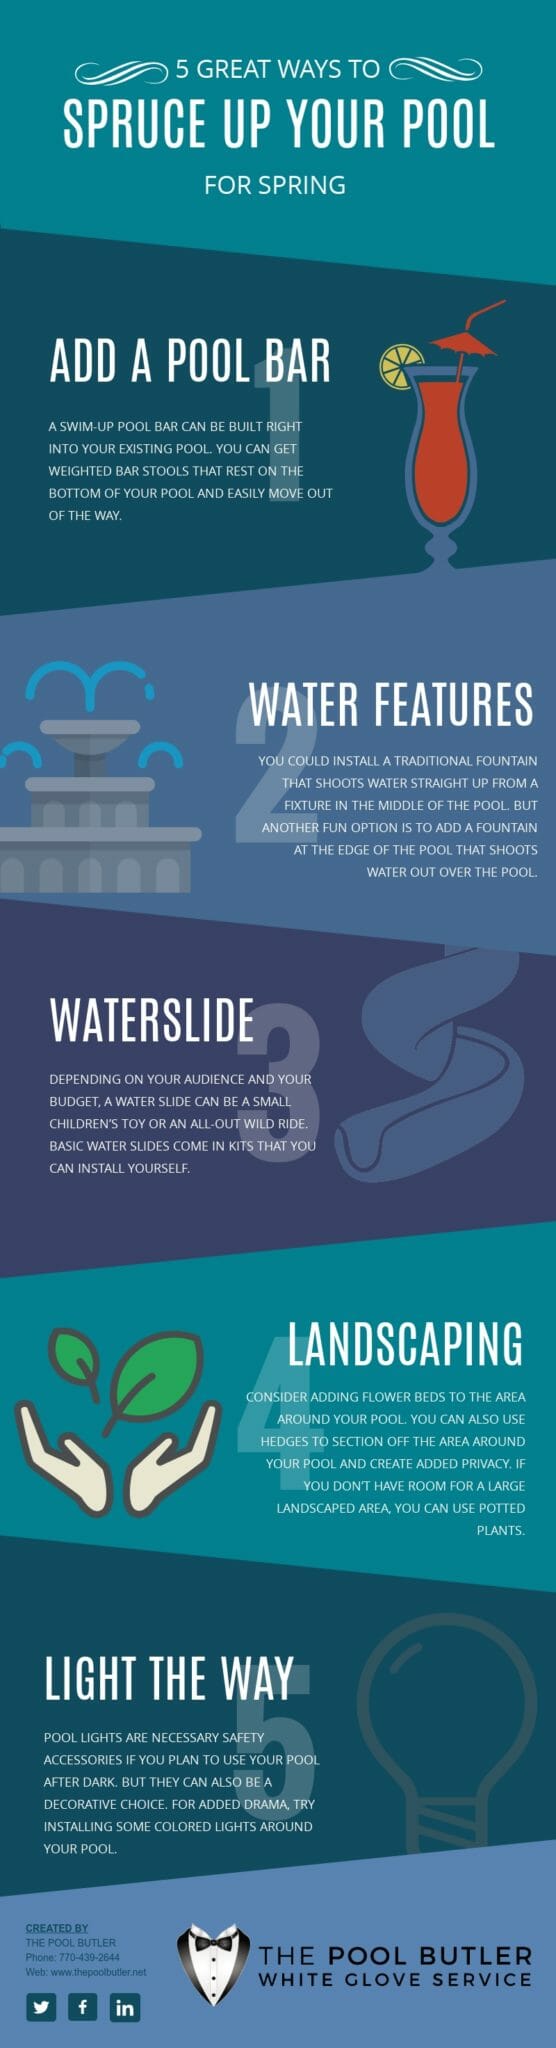 5 Great Ways to Spruce Up Your Pool for Spring [infographic]